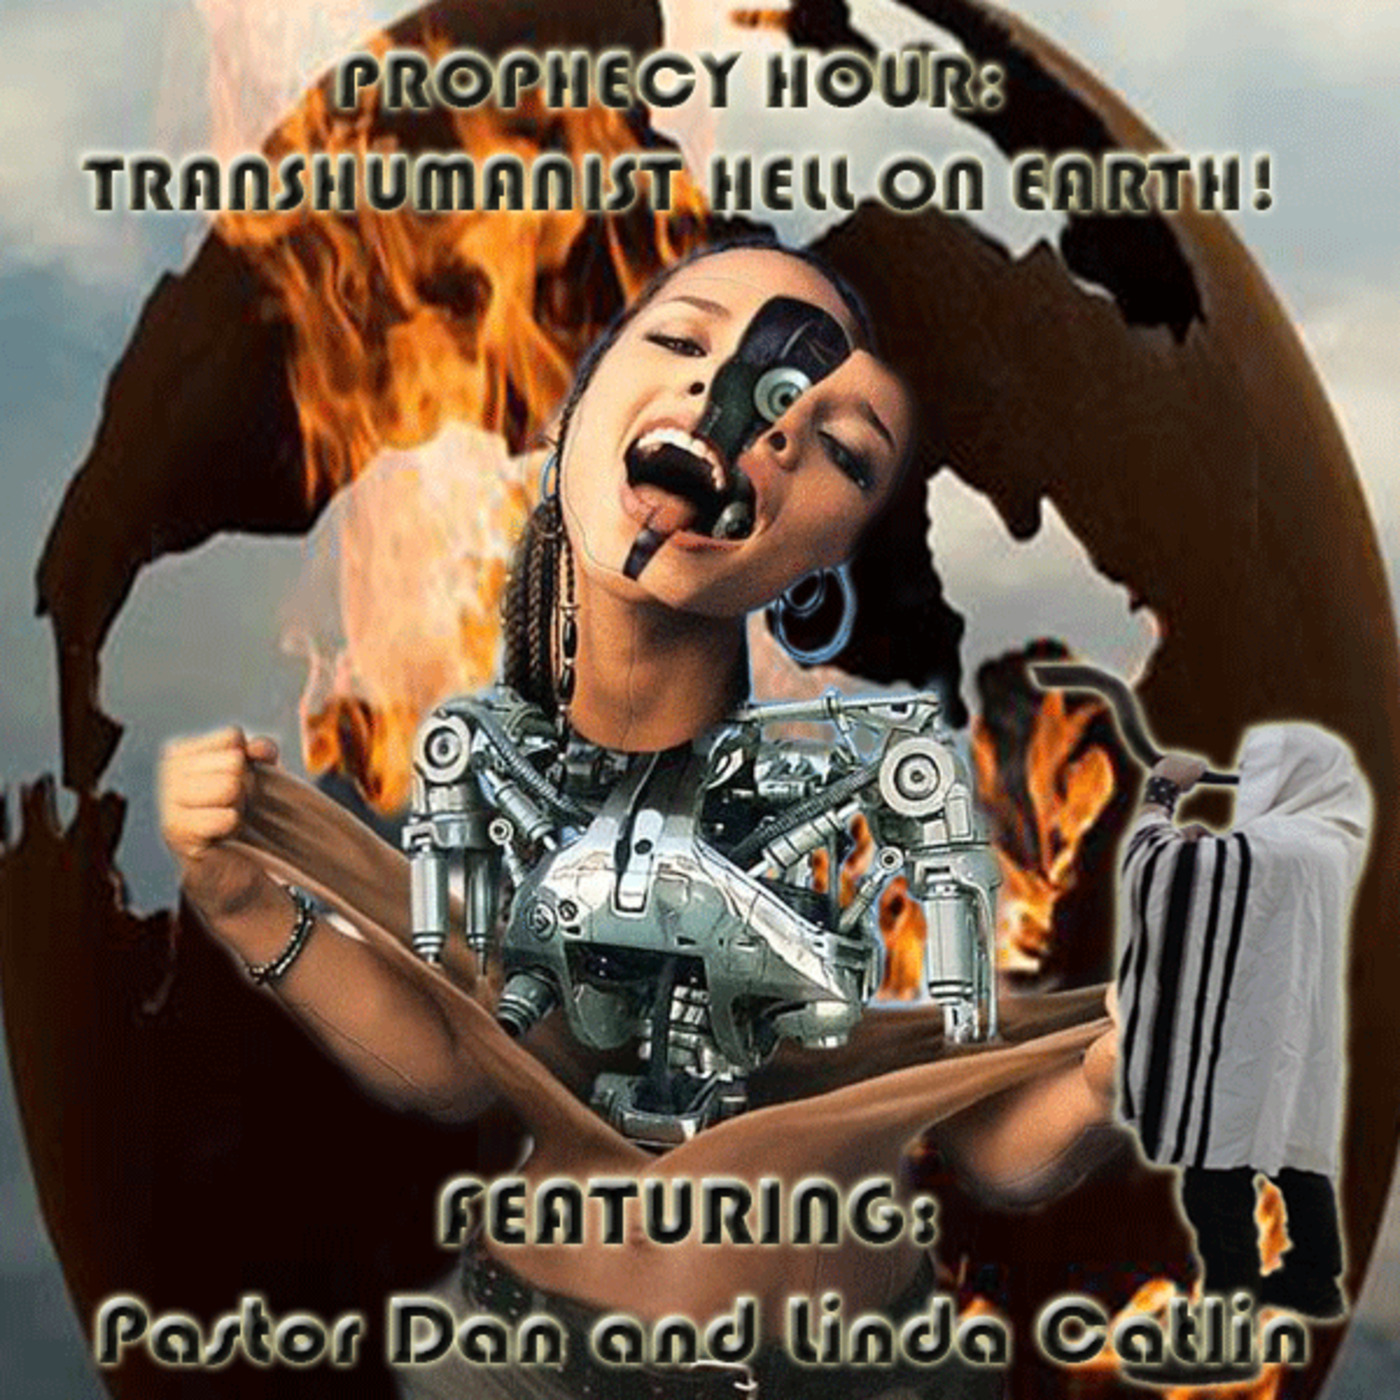 Episode 1138: PROPHECY HOUR: TRANSHUMANIST HELL ON EARTH!